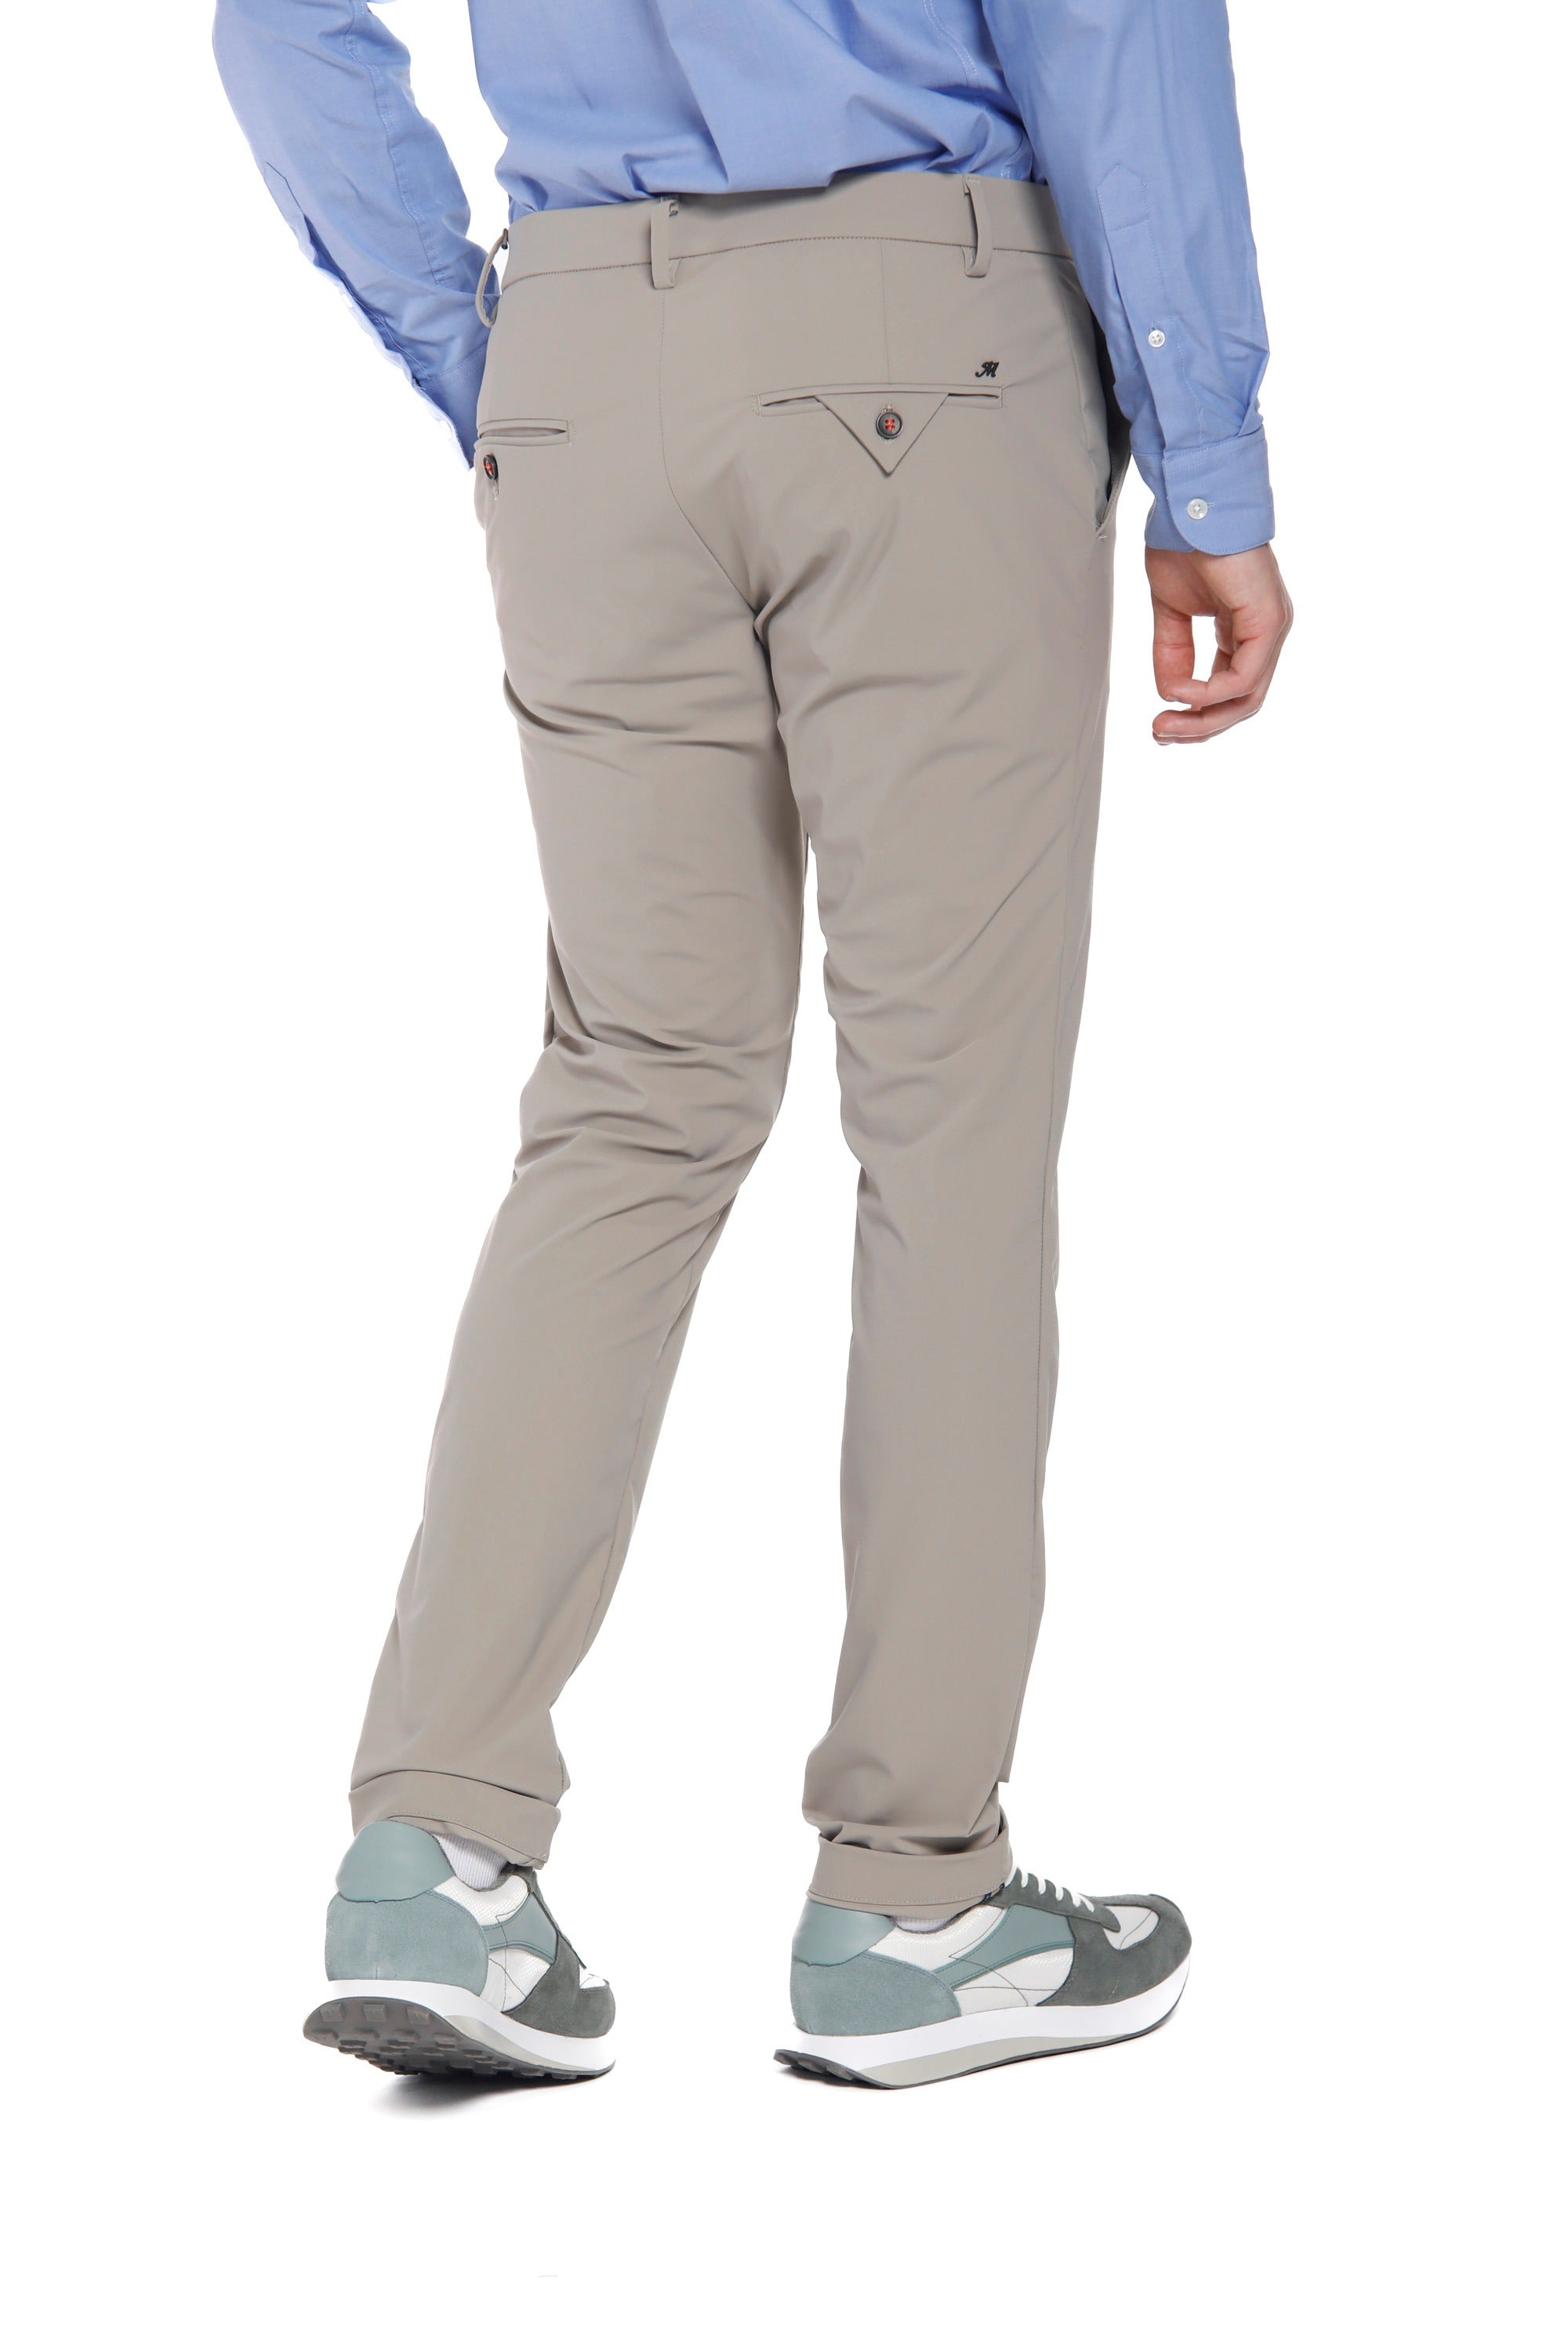 Milano Style Dynamic men's chino jogger pants in super technical jersey extra slim